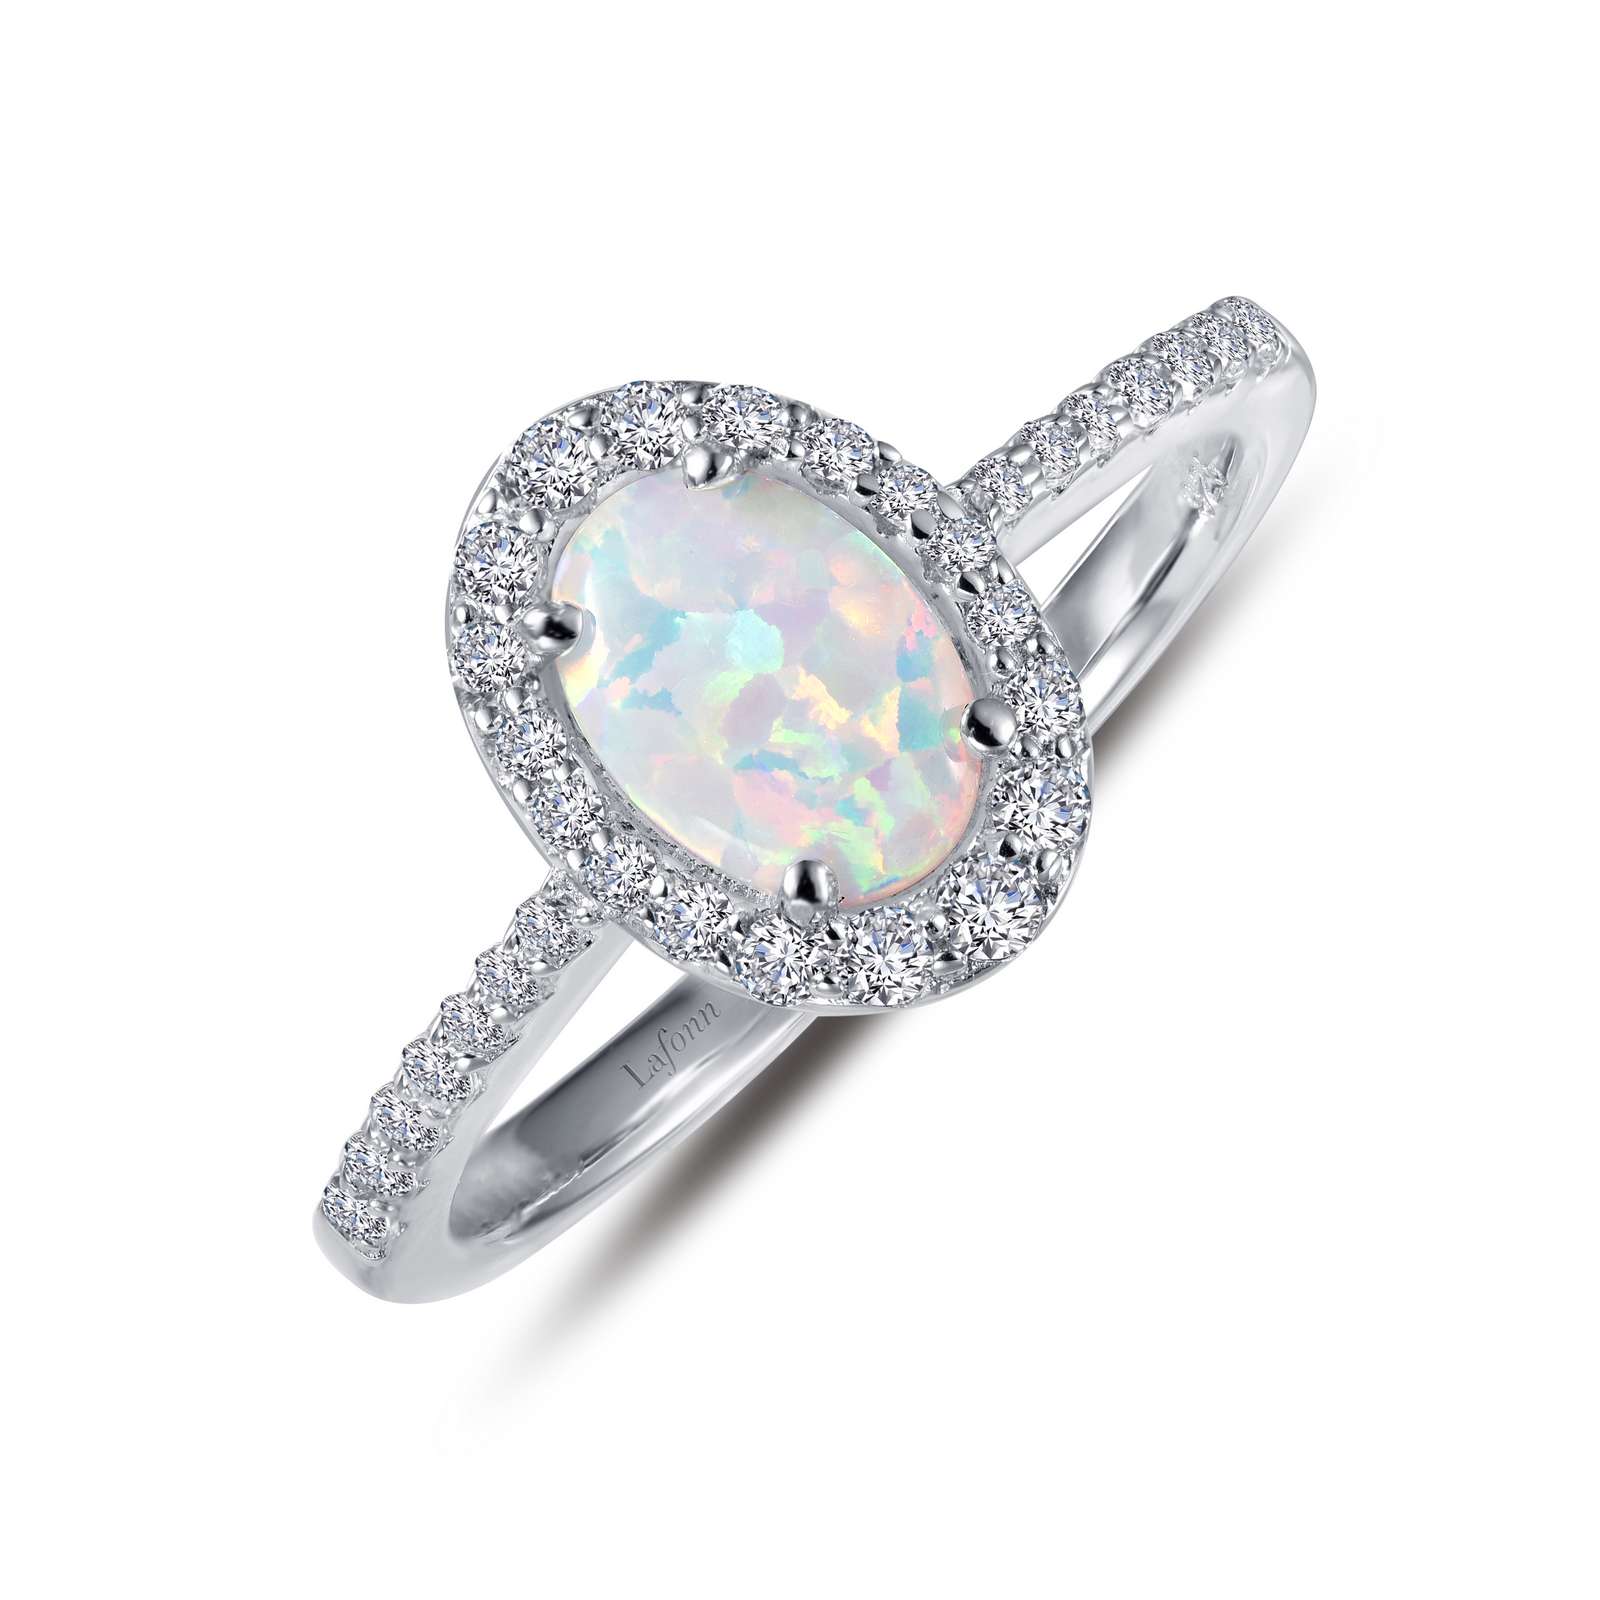 Halo Engagement Ring Griner Jewelry Co. Moultrie, GA